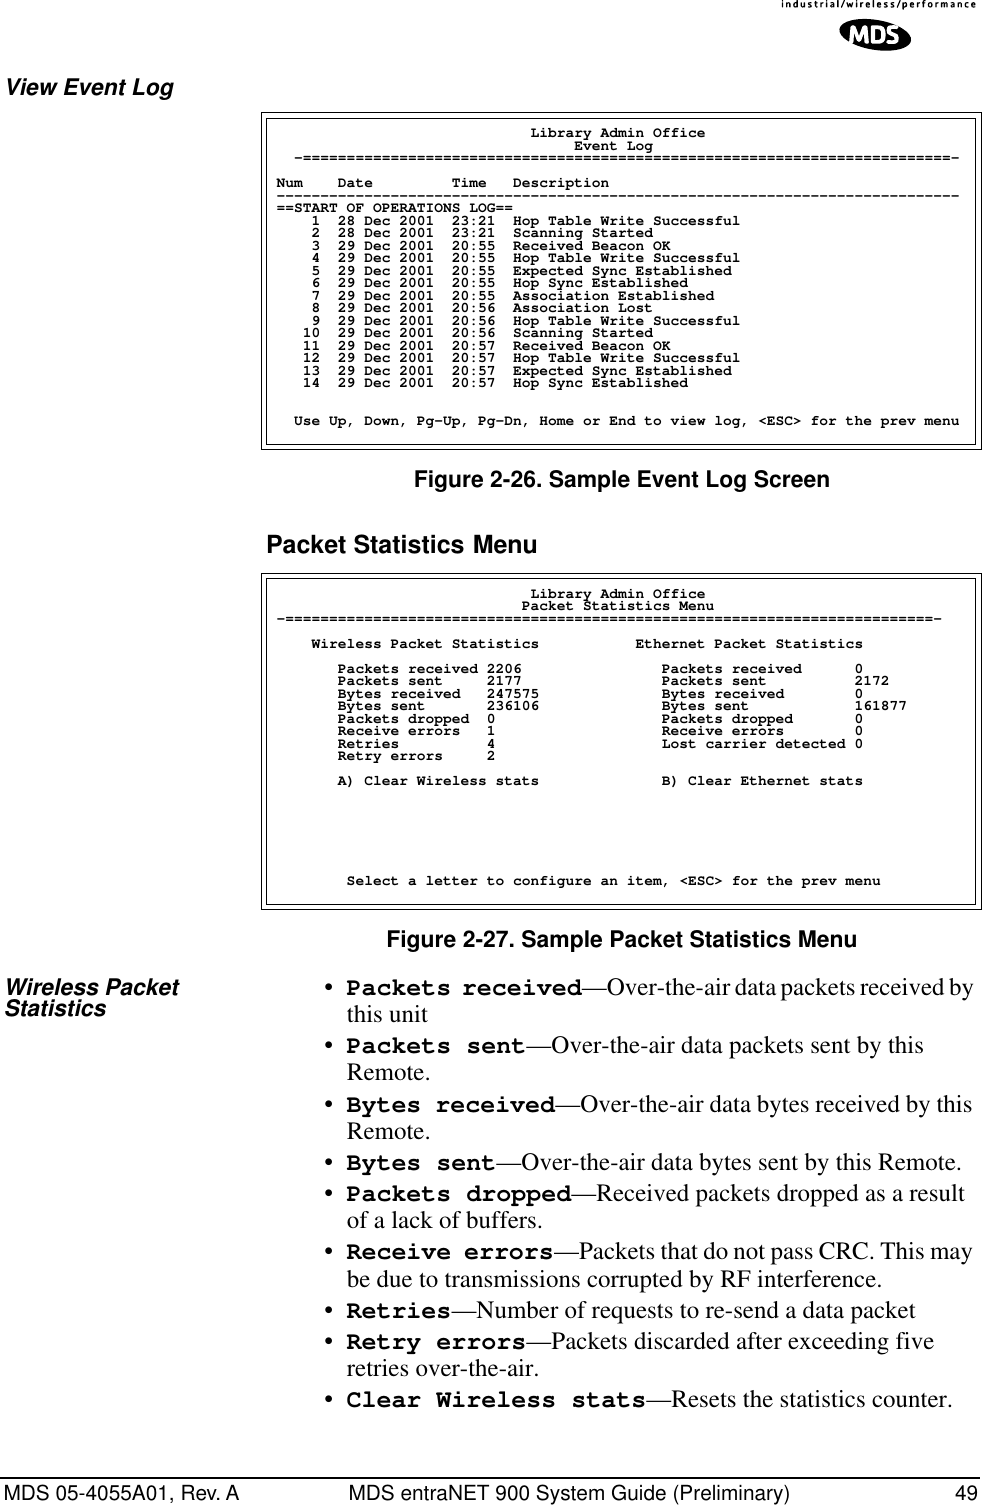 MDS 05-4055A01, Rev. A MDS entraNET 900 System Guide (Preliminary) 49View Event Log Figure 2-26. Sample Event Log ScreenPacket Statistics Menu Figure 2-27. Sample Packet Statistics MenuWireless Packet Statistics •Packets received—Over-the-air data packets received by this unit•Packets sent—Over-the-air data packets sent by this Remote.•Bytes received—Over-the-air data bytes received by this Remote.•Bytes sent—Over-the-air data bytes sent by this Remote.•Packets dropped—Received packets dropped as a result of a lack of buffers.•Receive errors—Packets that do not pass CRC. This may be due to transmissions corrupted by RF interference.•Retries—Number of requests to re-send a data packet•Retry errors—Packets discarded after exceeding five retries over-the-air.•Clear Wireless stats—Resets the statistics counter.                             Library Admin Office                                  Event Log  -==========================================================================-Num    Date         Time   Description------------------------------------------------------------------------------==START OF OPERATIONS LOG==    1  28 Dec 2001  23:21  Hop Table Write Successful    2  28 Dec 2001  23:21  Scanning Started    3  29 Dec 2001  20:55  Received Beacon OK    4  29 Dec 2001  20:55  Hop Table Write Successful    5  29 Dec 2001  20:55  Expected Sync Established    6  29 Dec 2001  20:55  Hop Sync Established    7  29 Dec 2001  20:55  Association Established    8  29 Dec 2001  20:56  Association Lost    9  29 Dec 2001  20:56  Hop Table Write Successful   10  29 Dec 2001  20:56  Scanning Started   11  29 Dec 2001  20:57  Received Beacon OK   12  29 Dec 2001  20:57  Hop Table Write Successful   13  29 Dec 2001  20:57  Expected Sync Established   14  29 Dec 2001  20:57  Hop Sync Established  Use Up, Down, Pg-Up, Pg-Dn, Home or End to view log, &lt;ESC&gt; for the prev menu                             Library Admin Office                            Packet Statistics Menu-==========================================================================-    Wireless Packet Statistics           Ethernet Packet Statistics       Packets received 2206                Packets received      0       Packets sent     2177                Packets sent          2172       Bytes received   247575              Bytes received        0       Bytes sent       236106              Bytes sent            161877       Packets dropped  0                   Packets dropped       0       Receive errors   1                   Receive errors        0       Retries          4                   Lost carrier detected 0          Retry errors     2        A) Clear Wireless stats              B) Clear Ethernet stats        Select a letter to configure an item, &lt;ESC&gt; for the prev menu